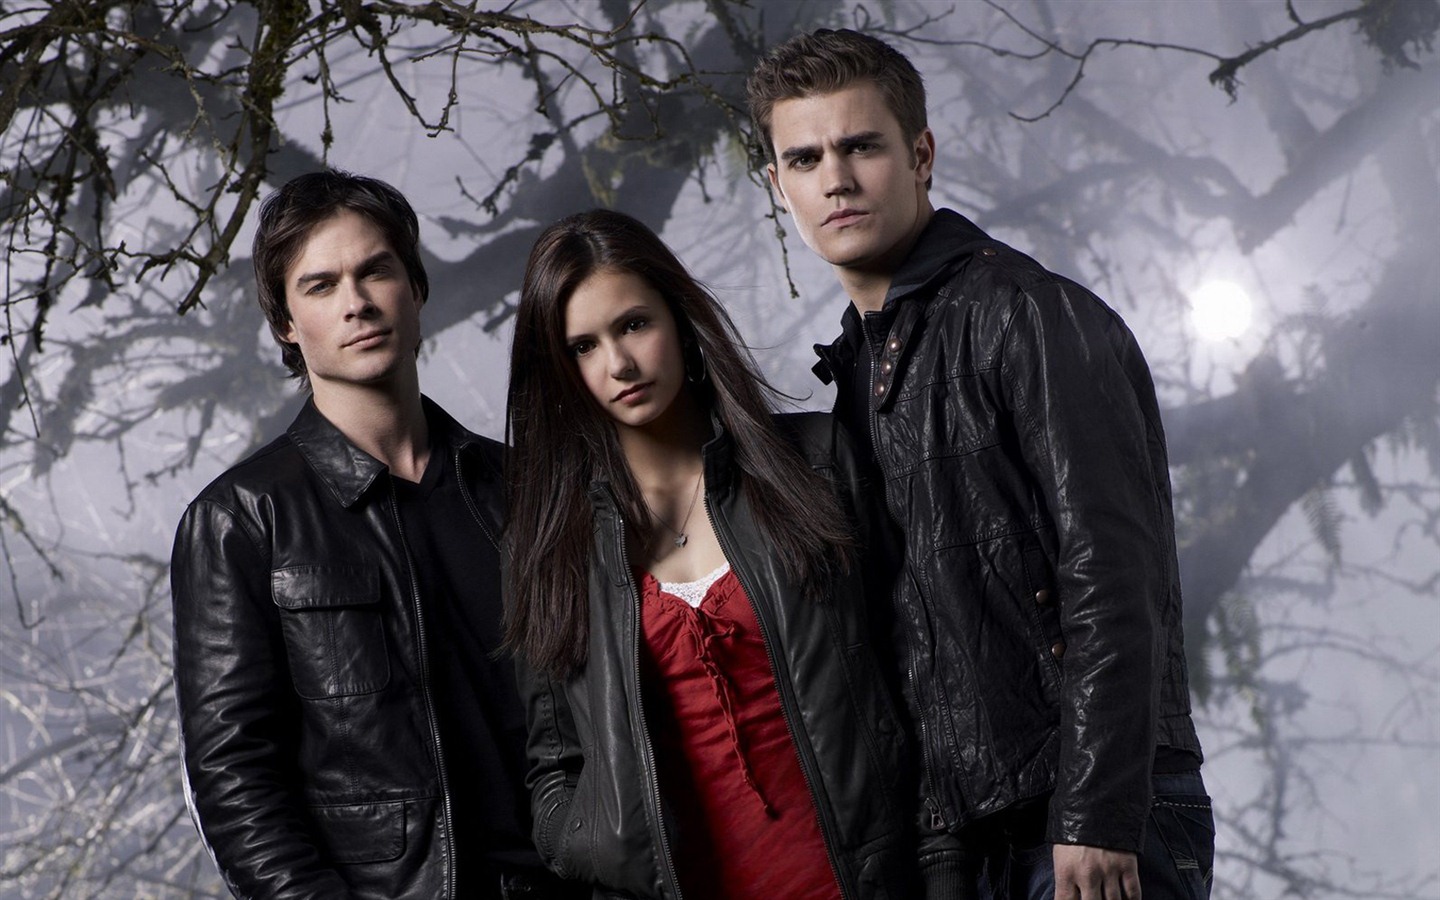 The Vampire Diaries HD Wallpapers #3 - 1440x900